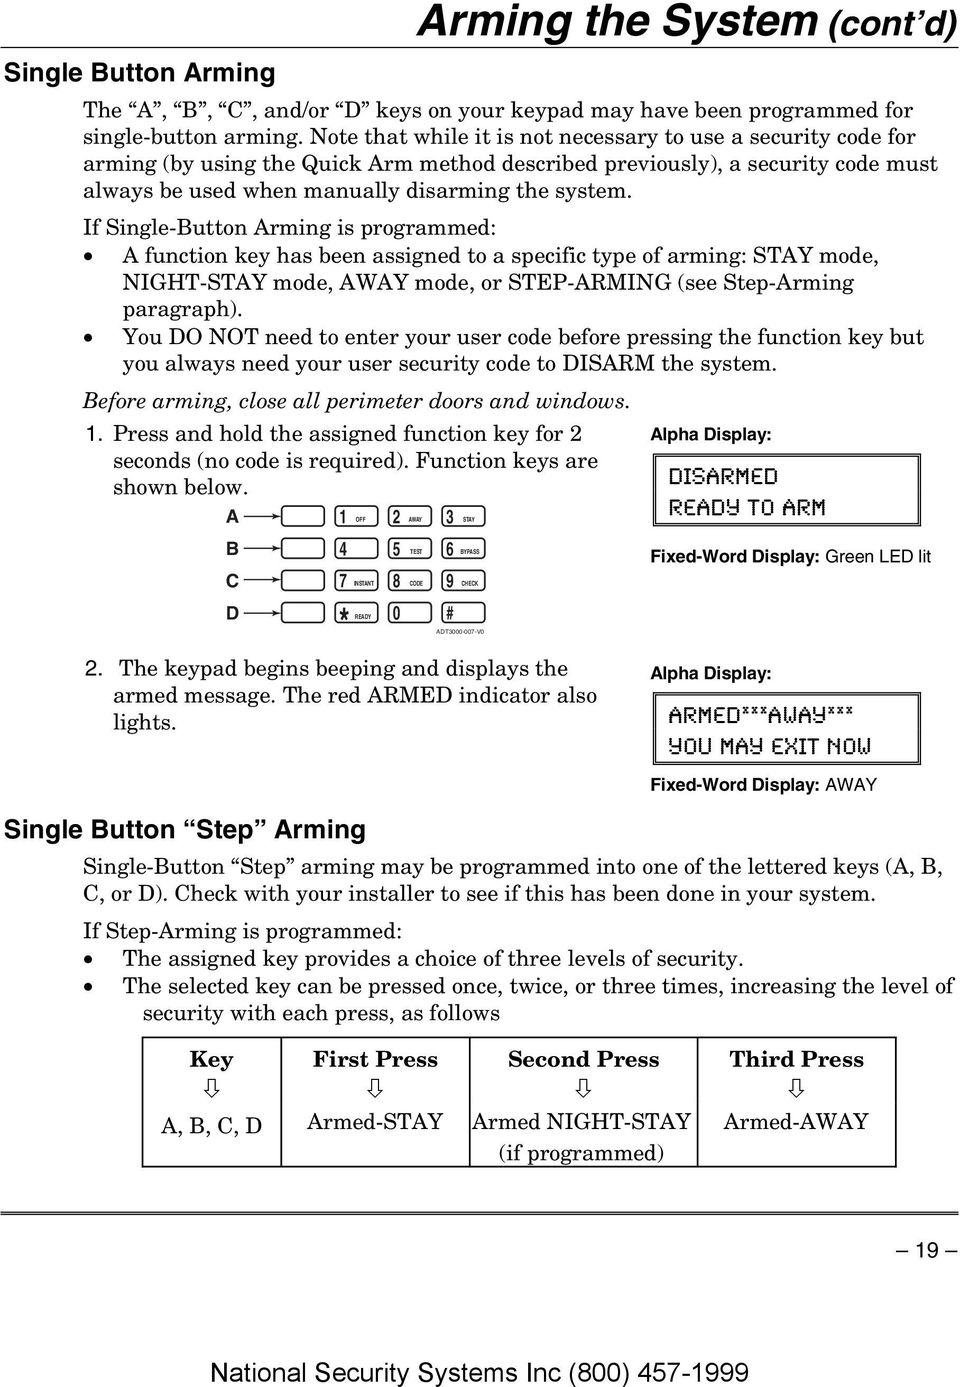 If Single-Button Arming is programmed: A function key has been assigned to a specific type of arming: STAY mode, NIGHT-STAY mode, AWAY mode, or STEP-ARMING (see Step-Arming paragraph).